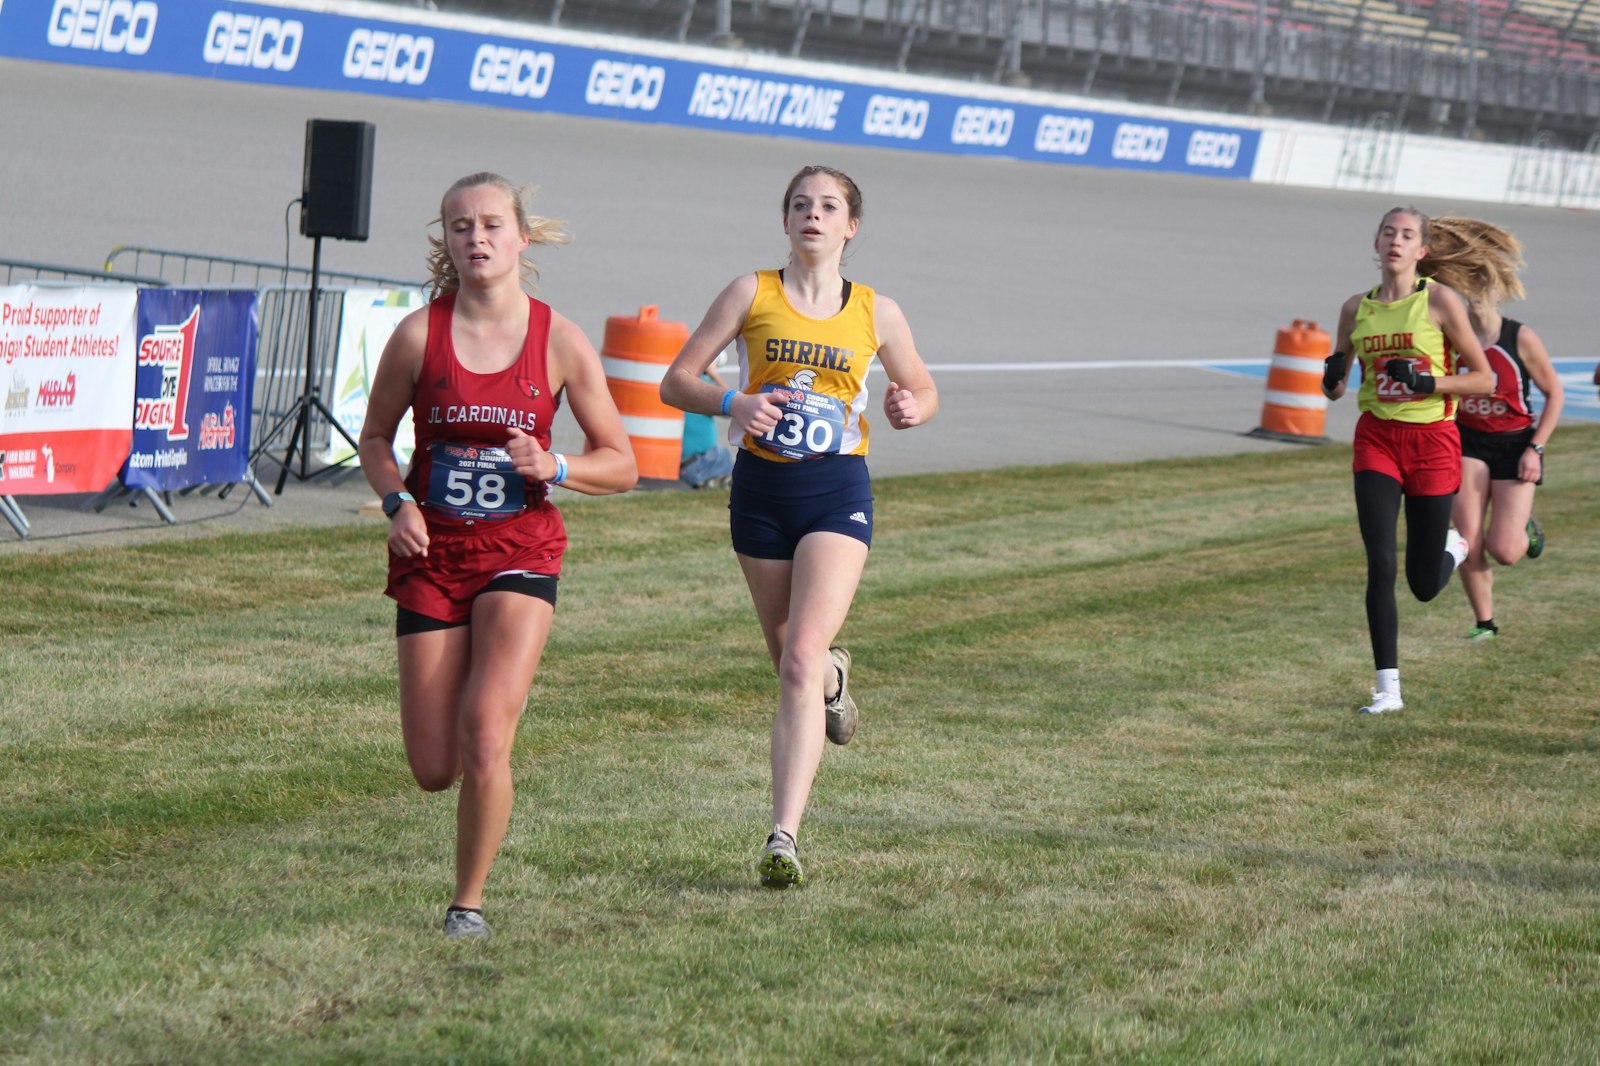 Sprinting toward the finish line, Royal Oak Shrine’s Isobel Malcolm leads her team to an eighth-place finish. Malcolm, who was 63rd, improved her best race time by more than one minute.